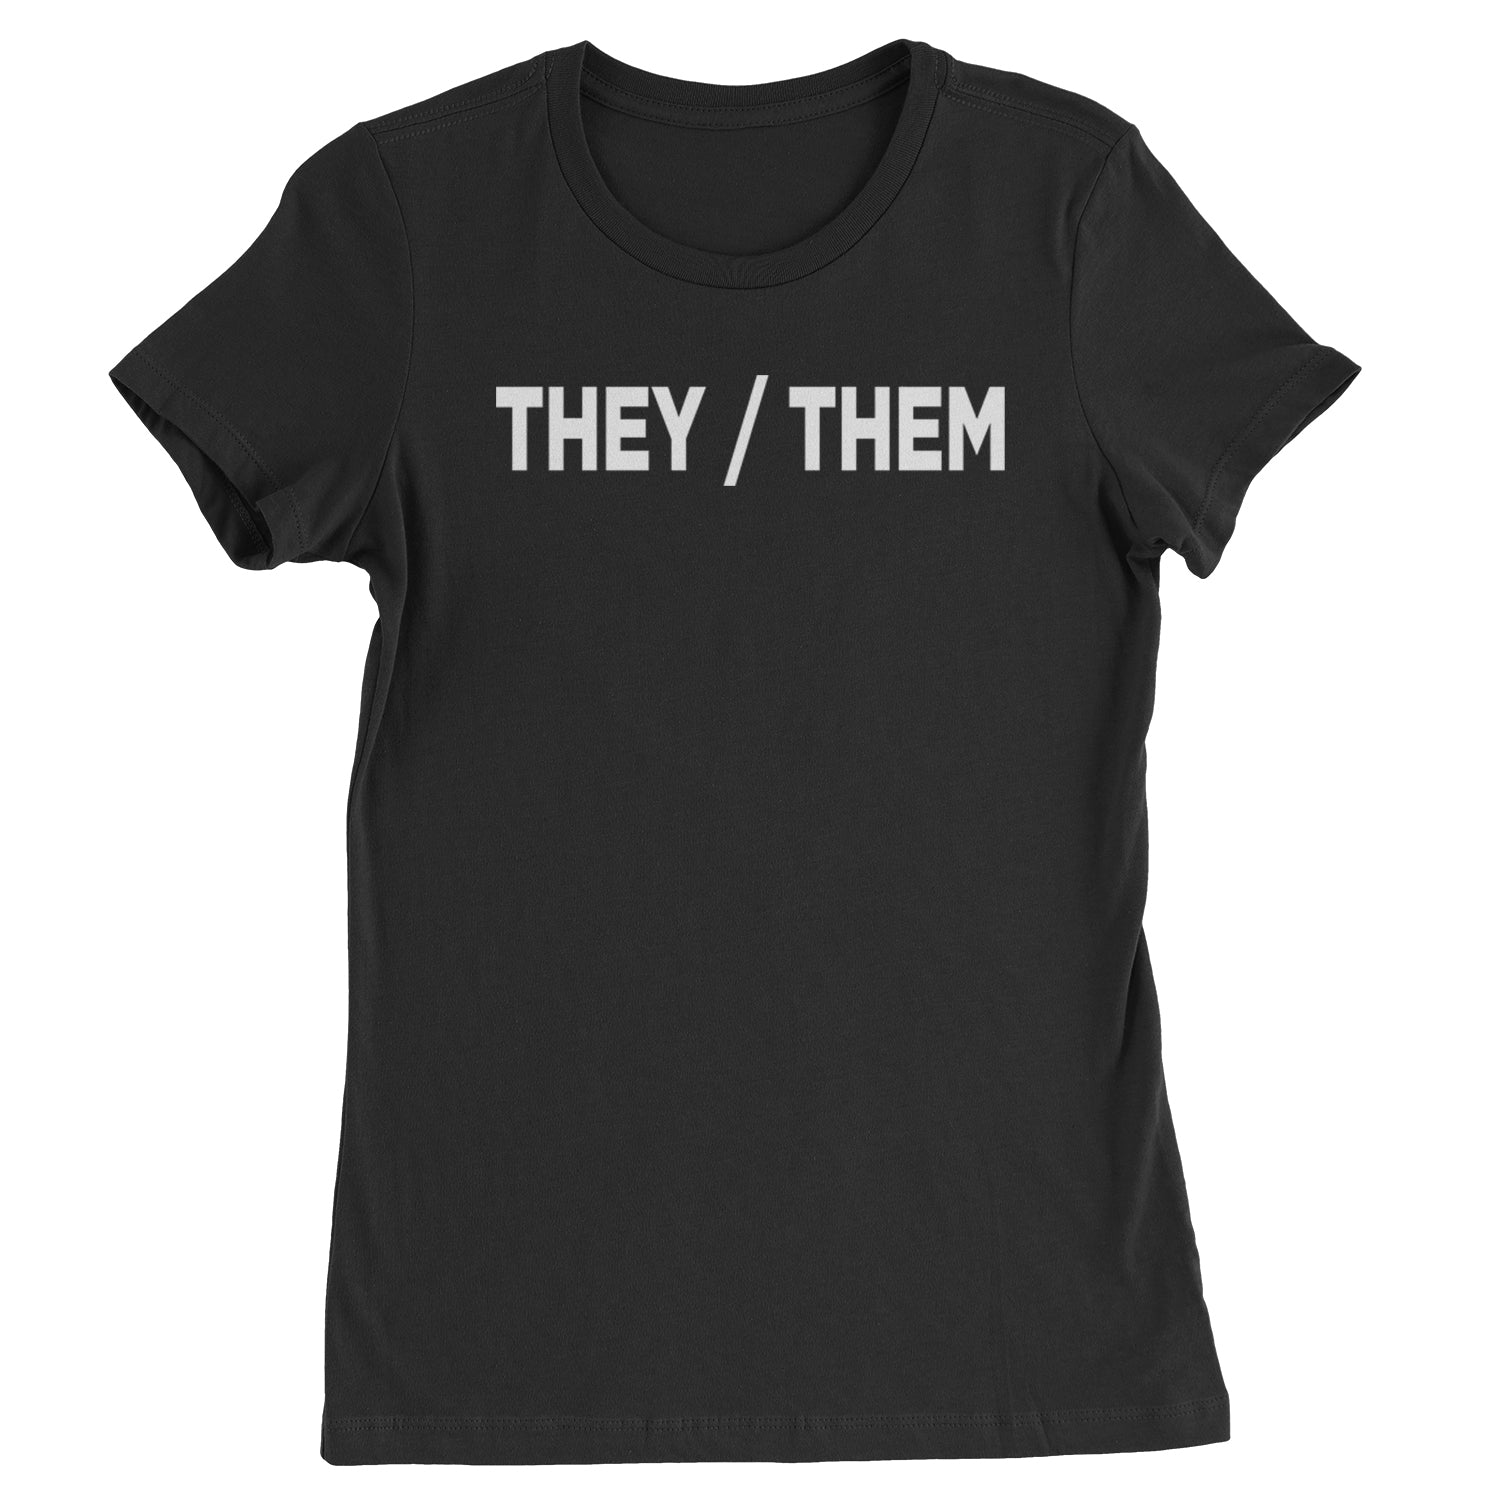 They Them Gender Pronouns Diversity and Inclusion Womens T-shirt binary, civil, gay, he, her, him, nonbinary, pride, rights, she, them, they by Expression Tees